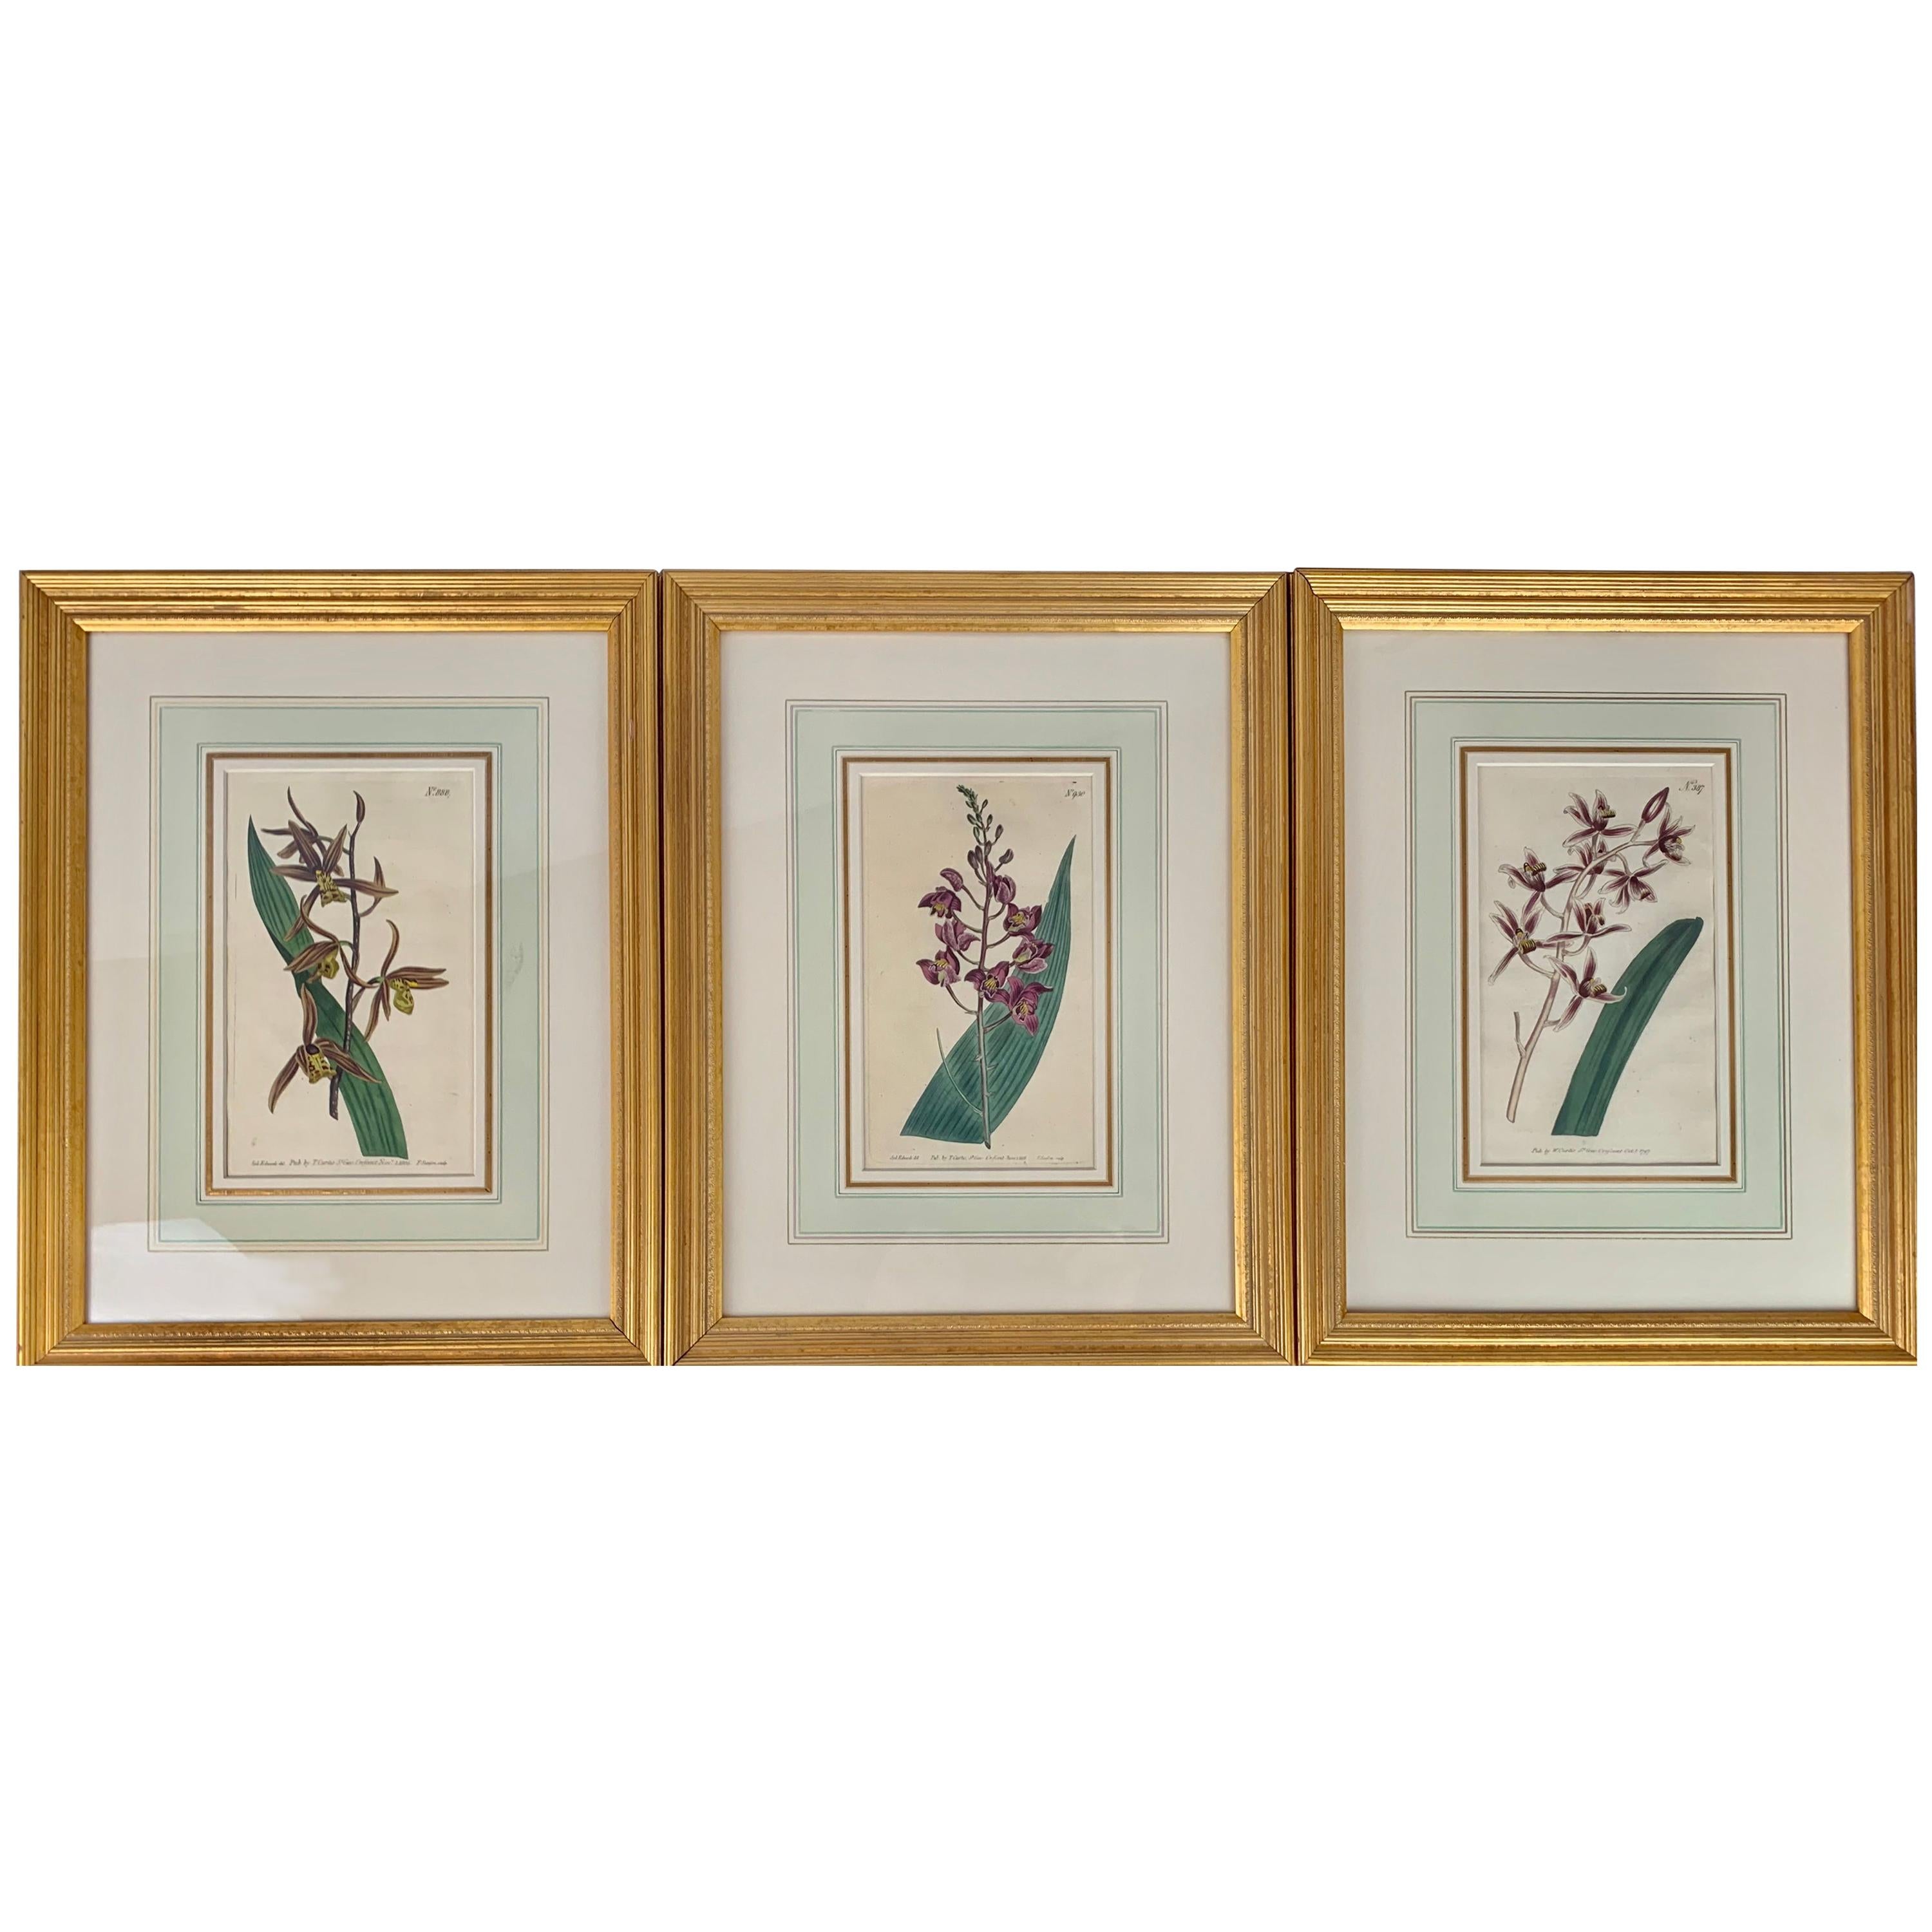 Orchid Engravings Hand Colored by William Curtis, England, 1797-1806-Set of 3